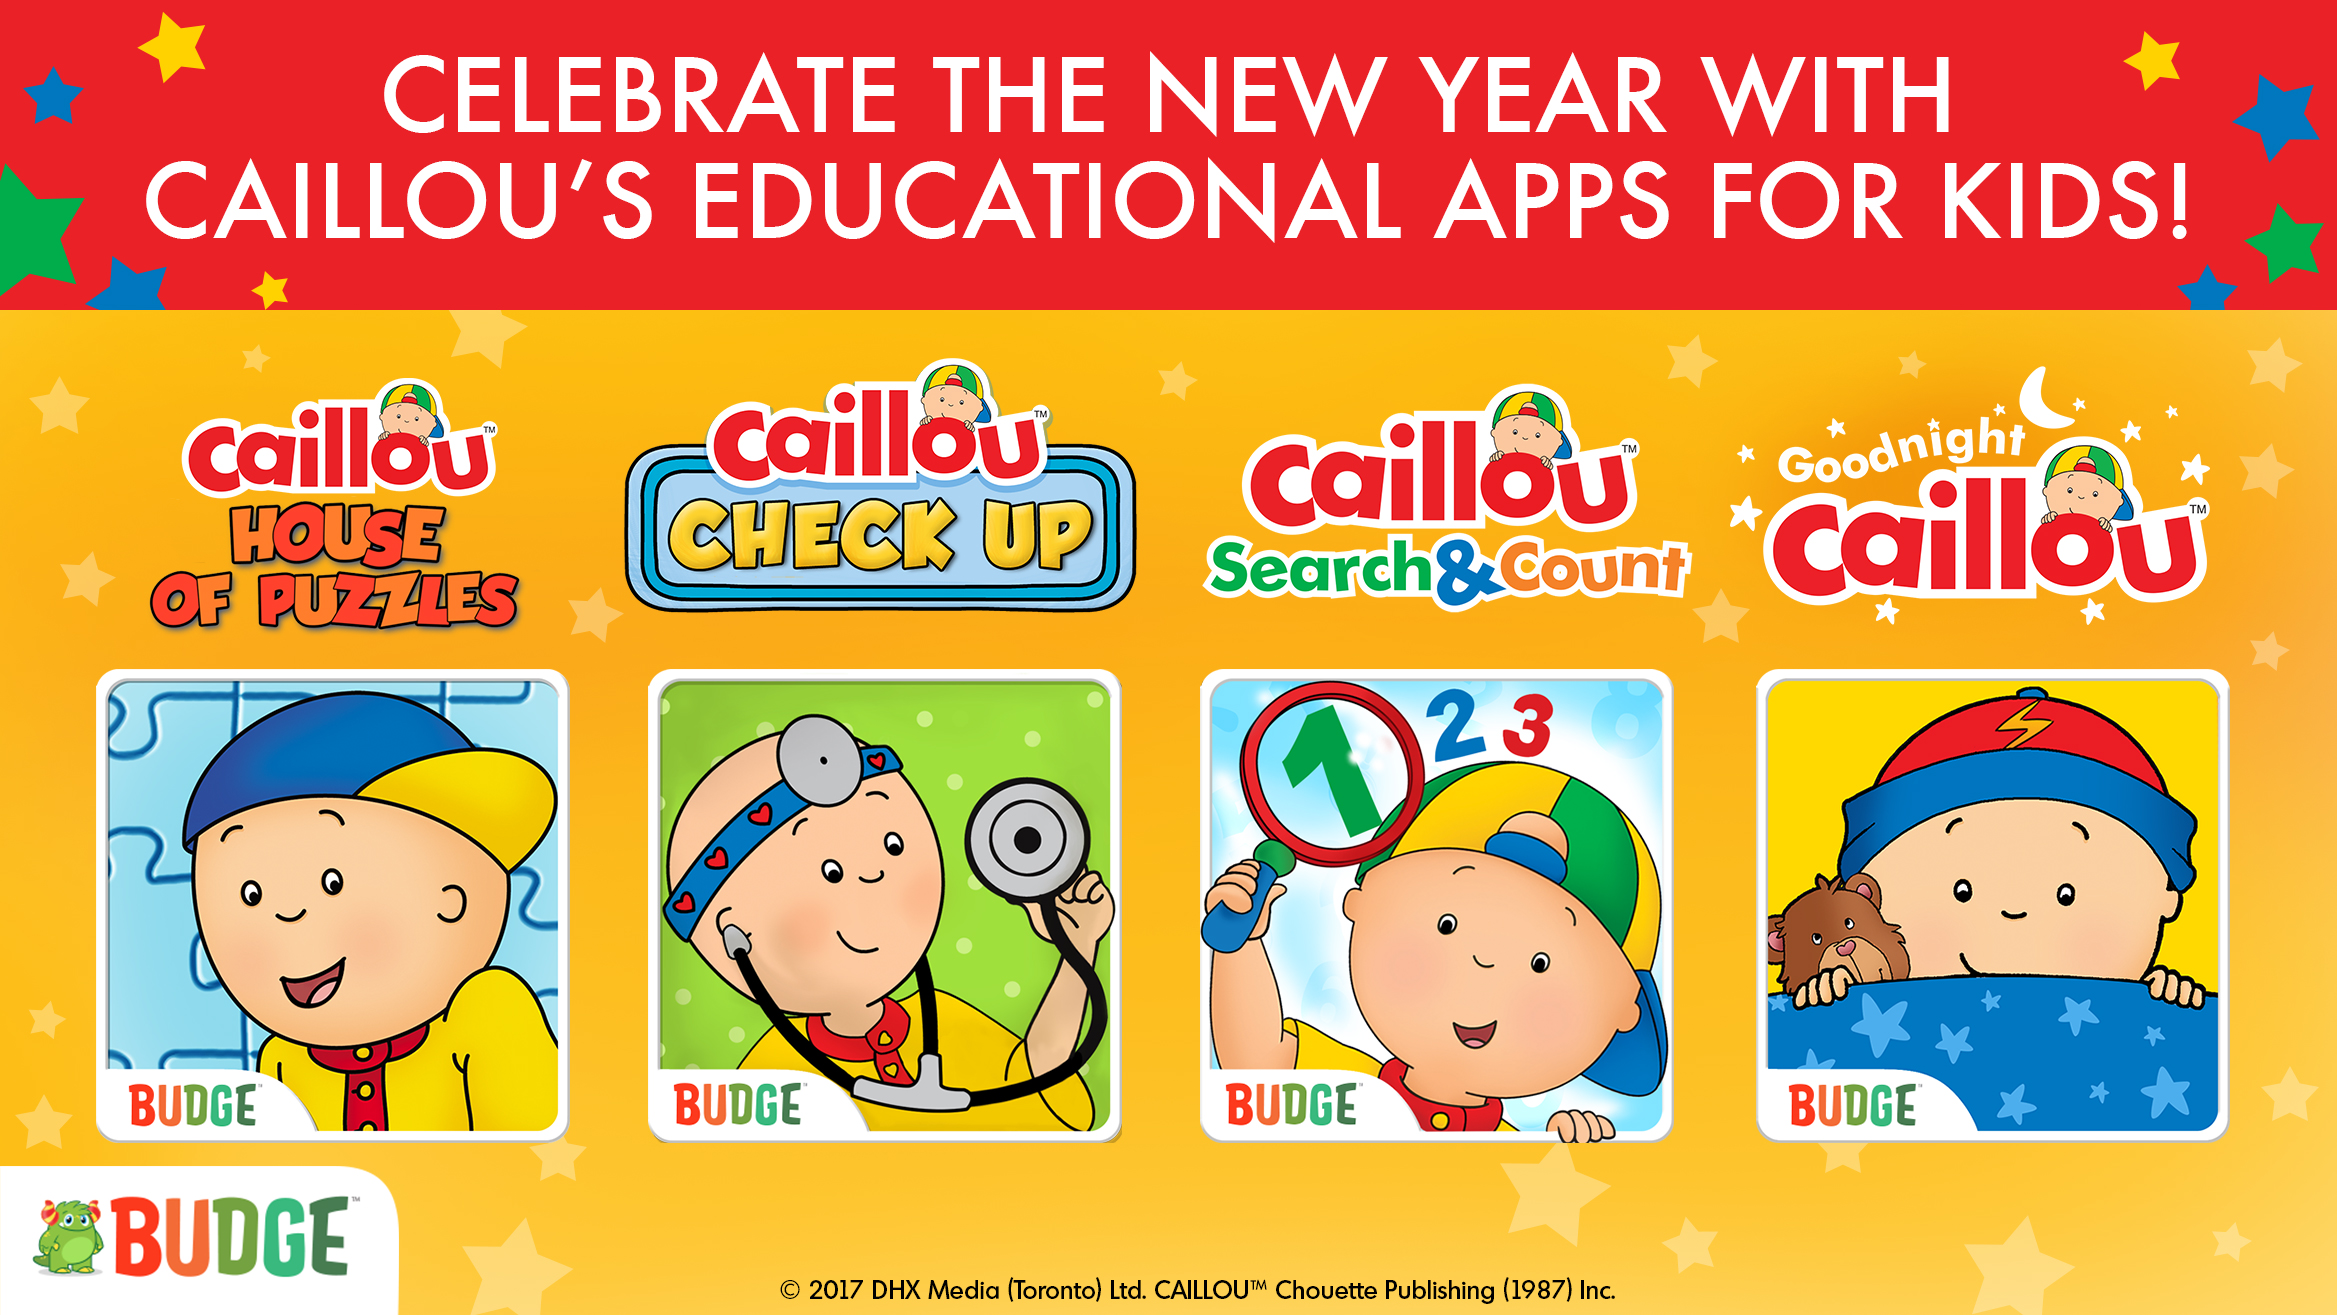 Celebrate the New Year with Caillou’s Educational Apps for Kids! post image